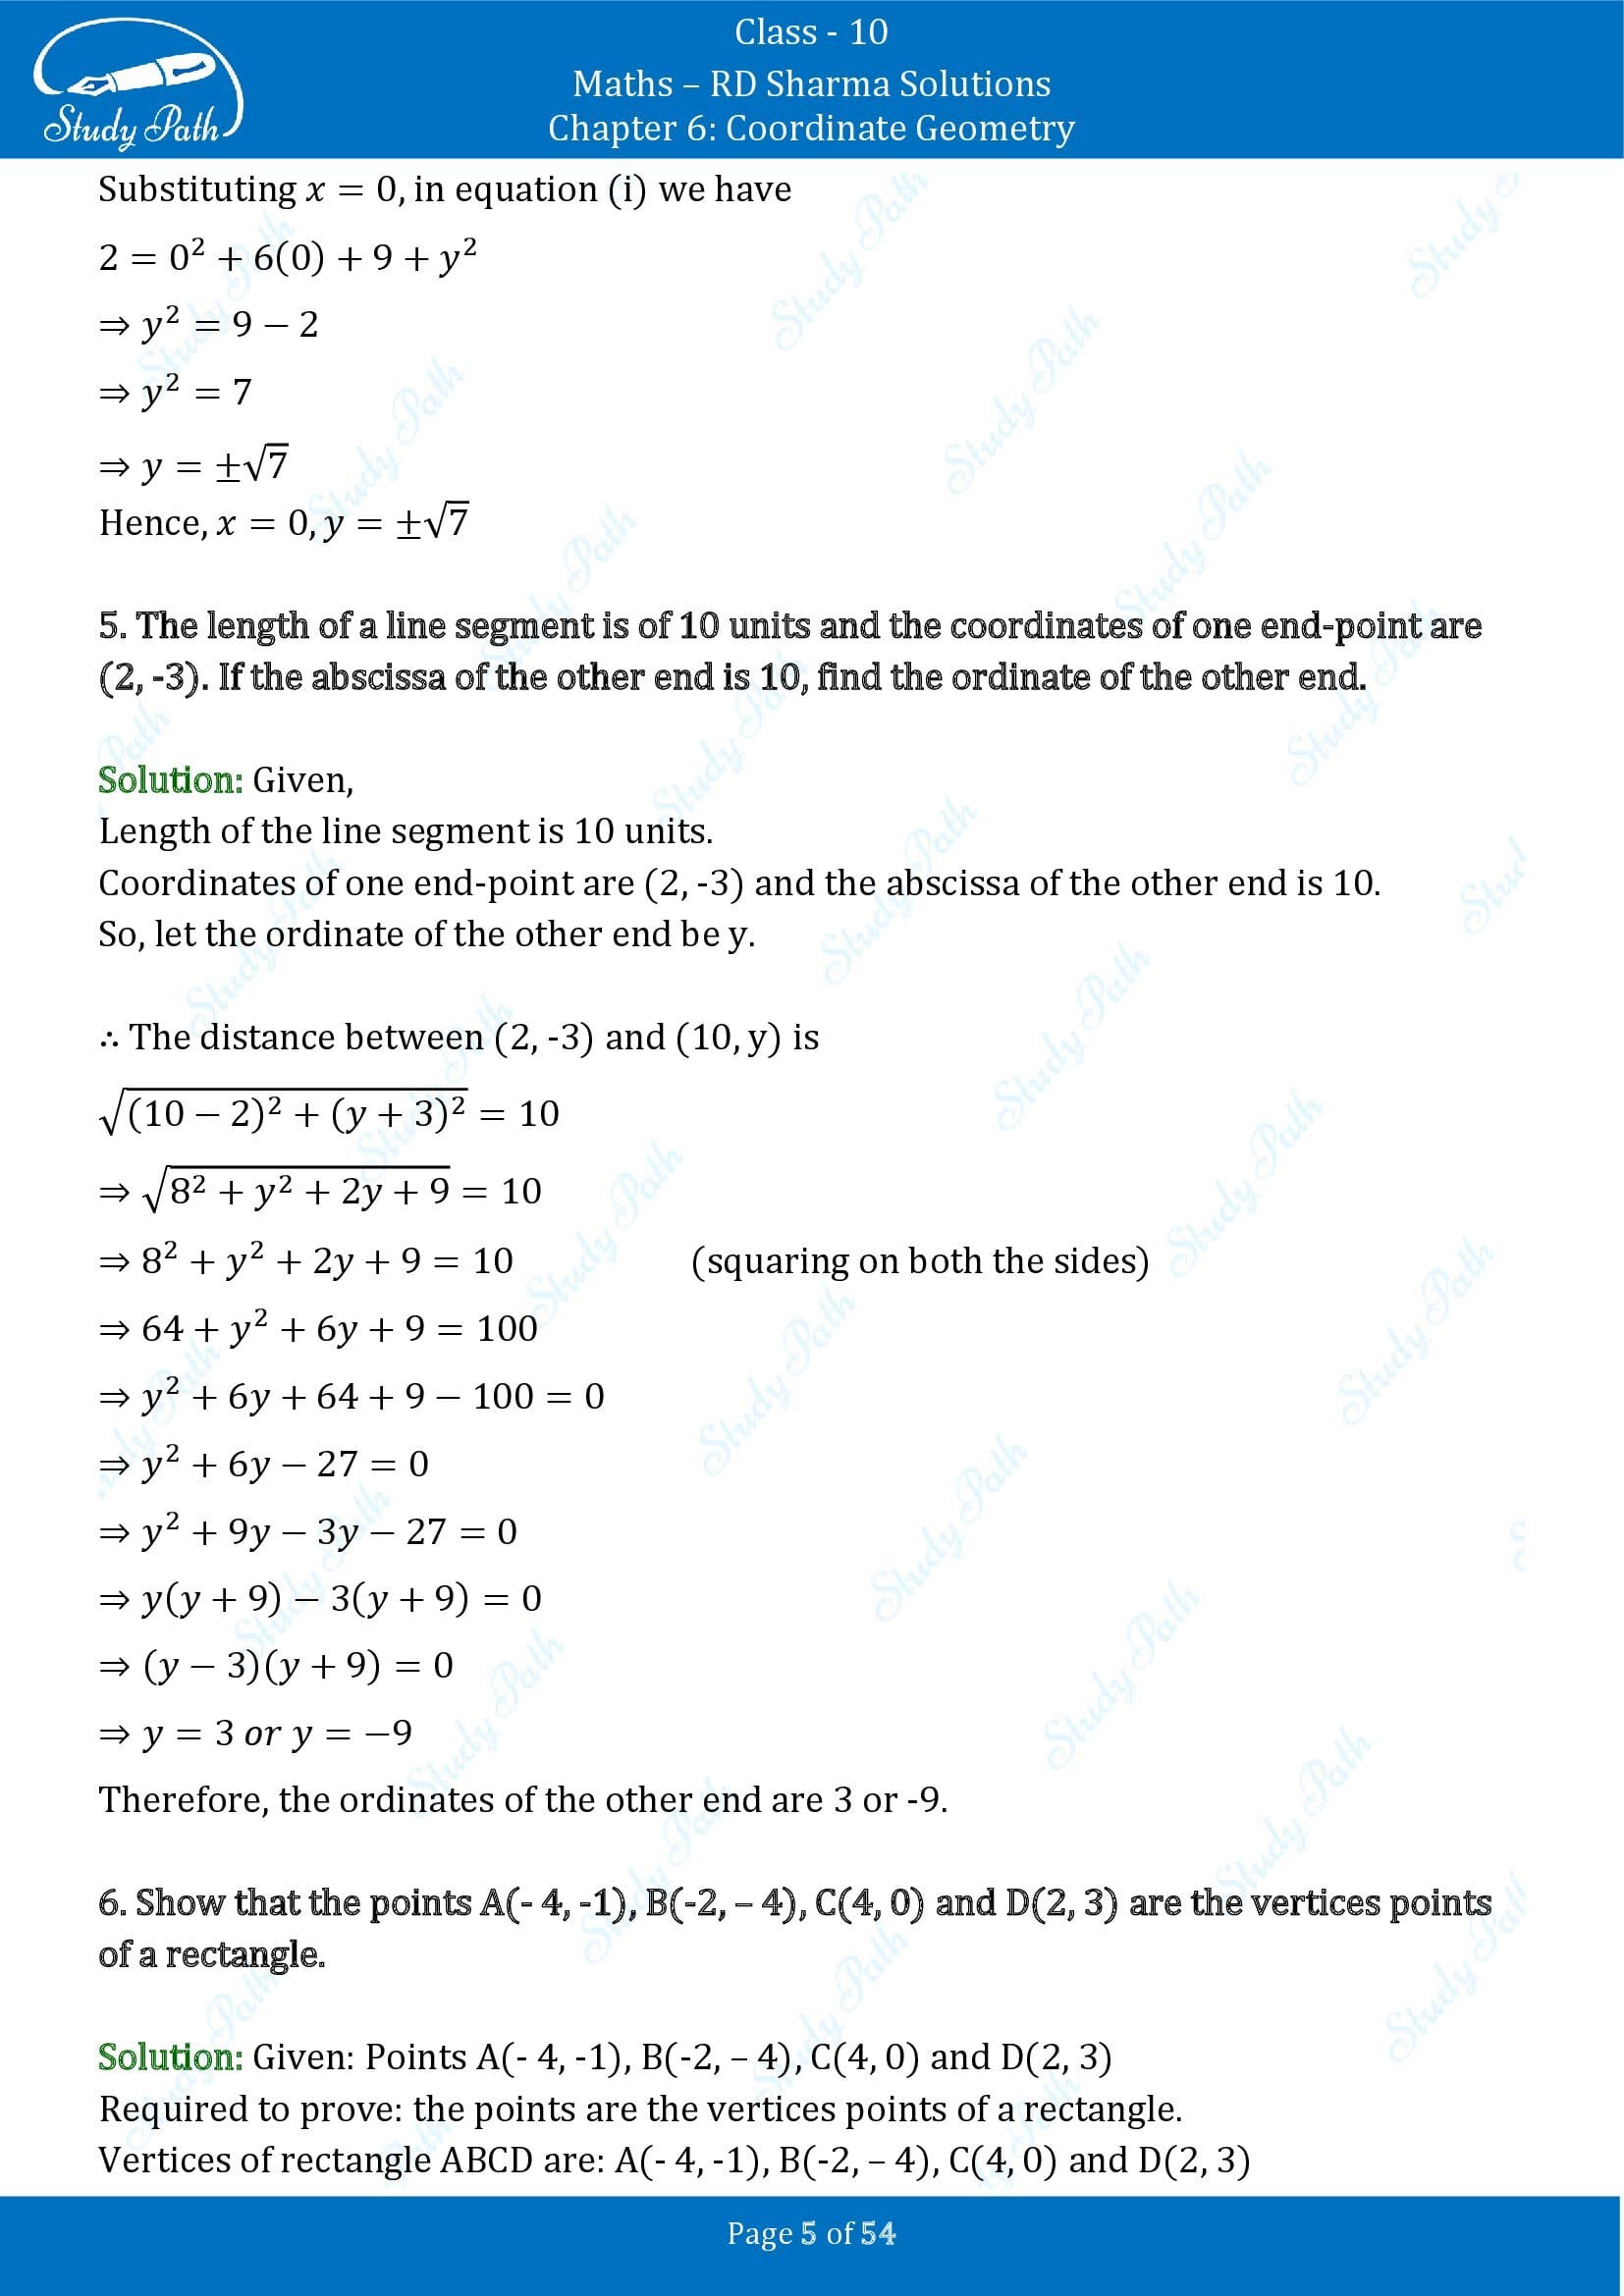 RD Sharma Solutions Class 10 Chapter 6 Coordinate Geometry Exercise 6.2 0005